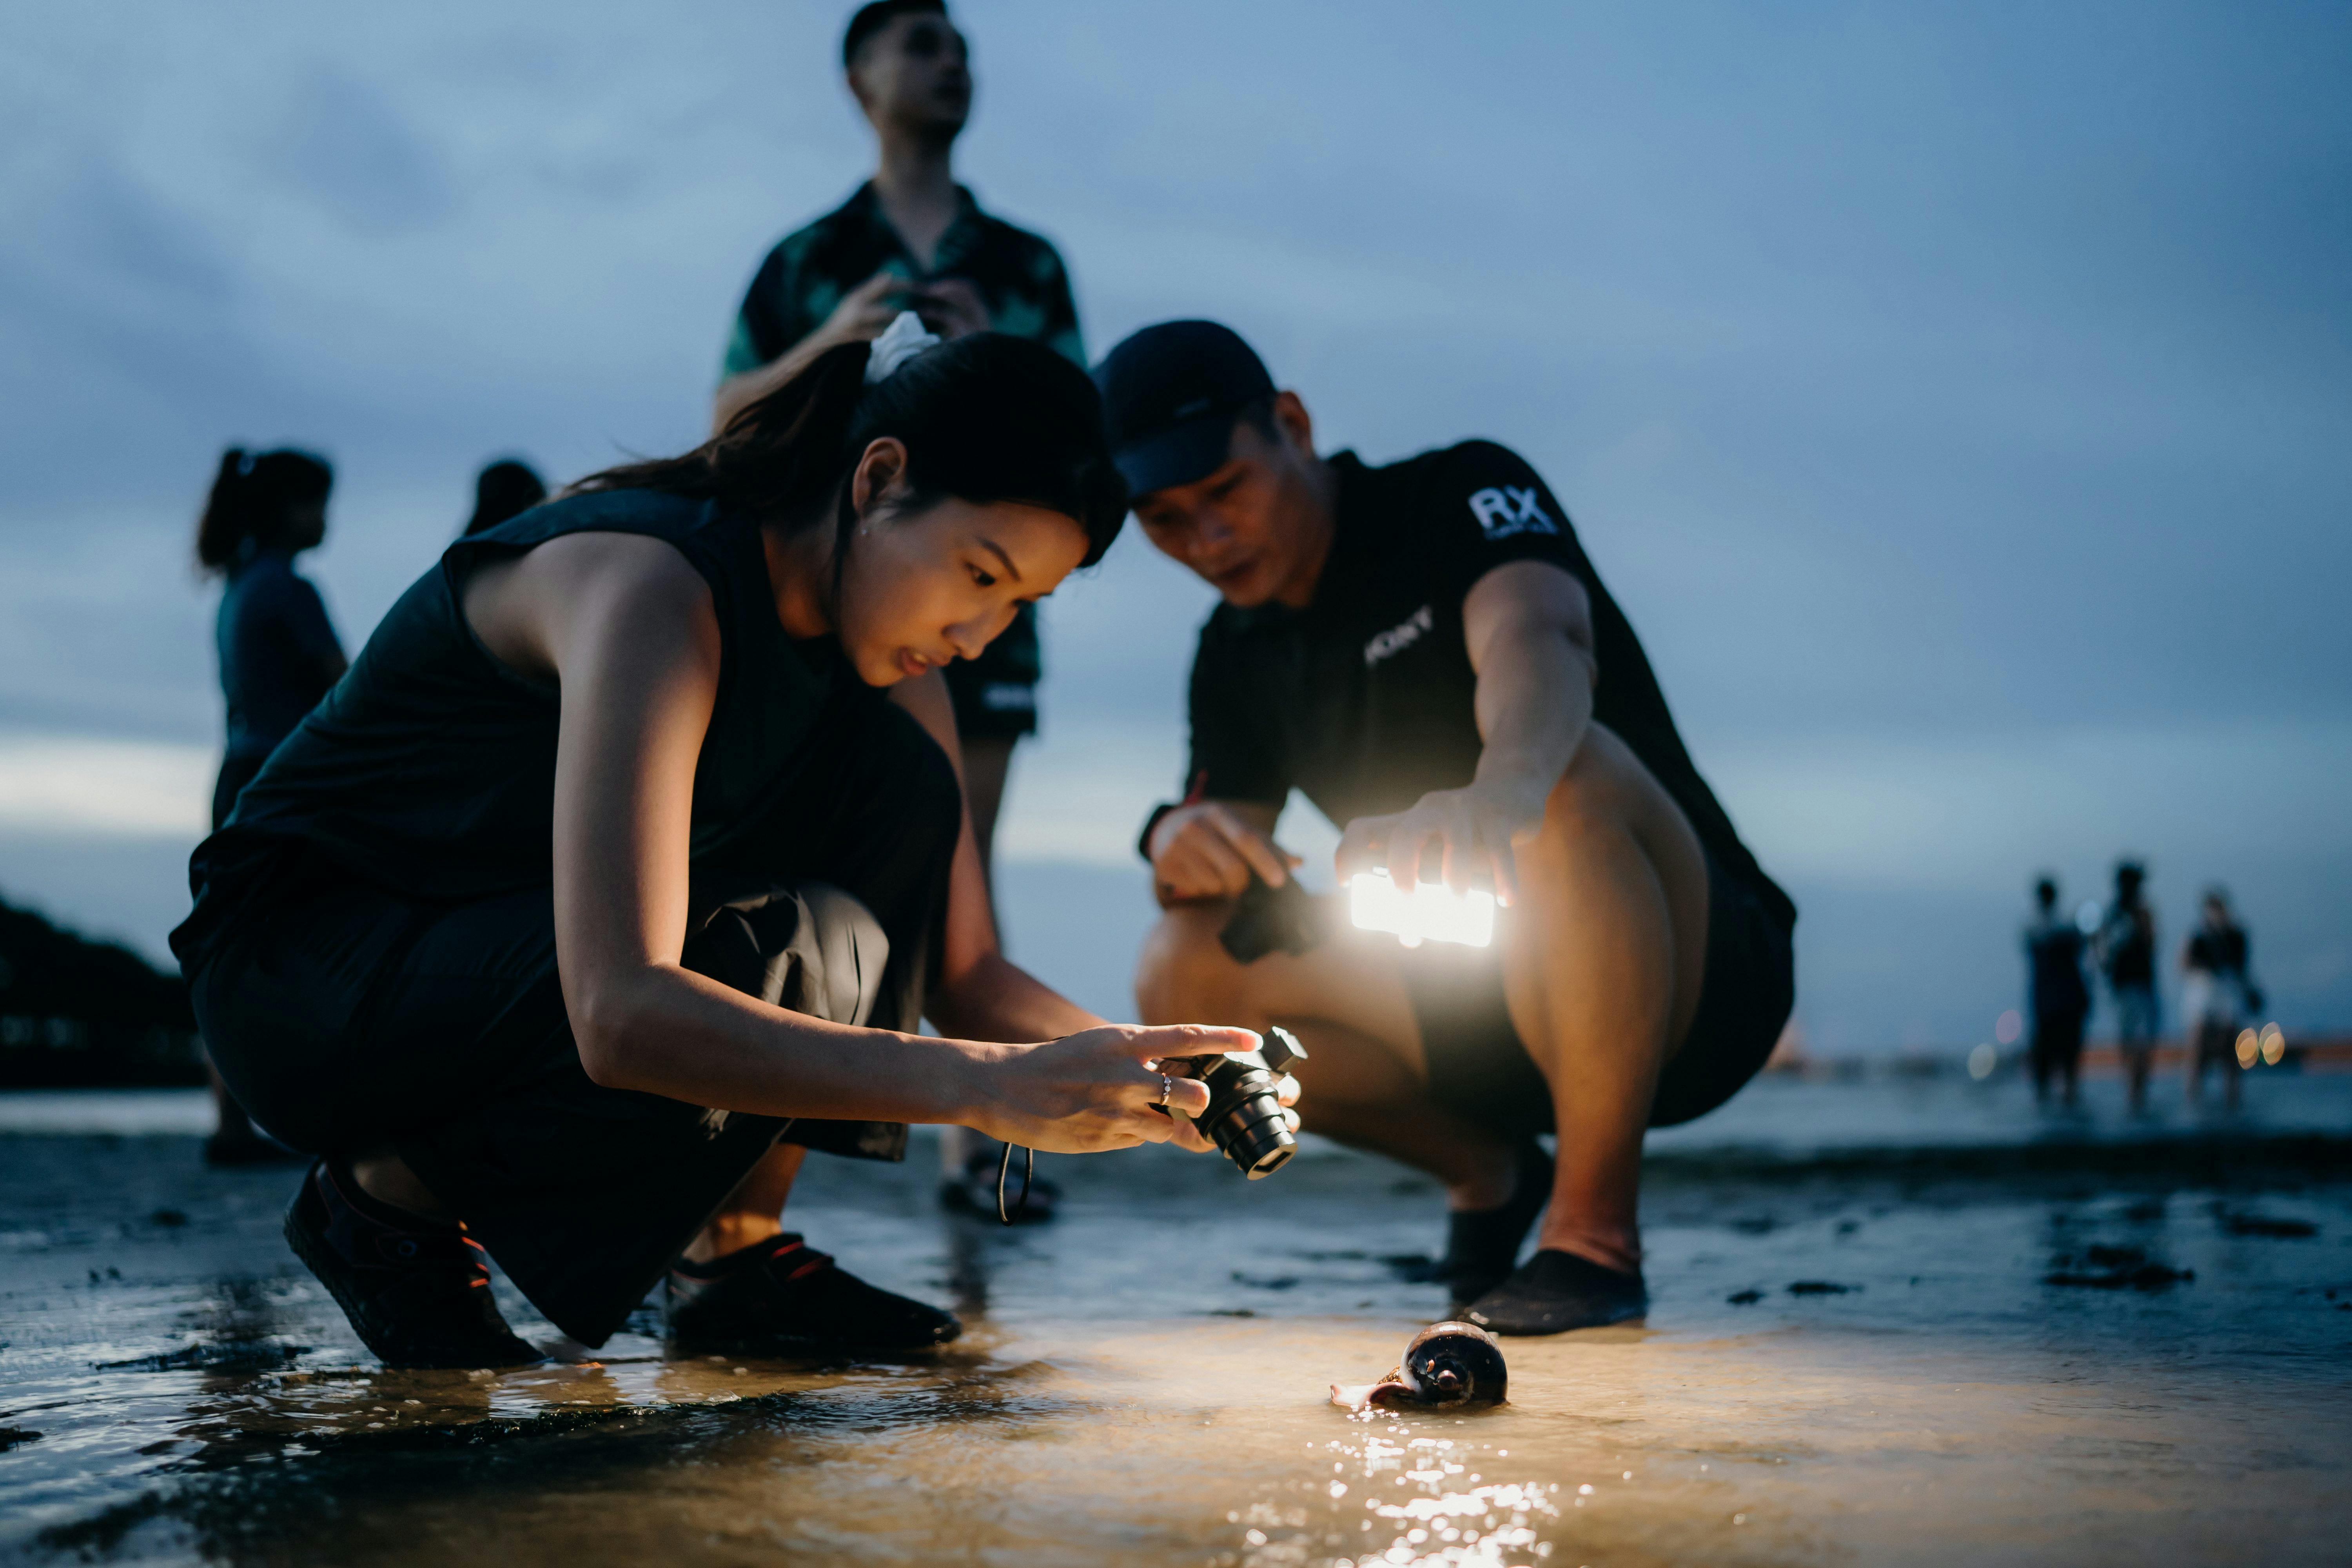 Changi beach intertidal exploration at dusk. Photo for Seek Sophie, courtesy of @marcus_cchow.